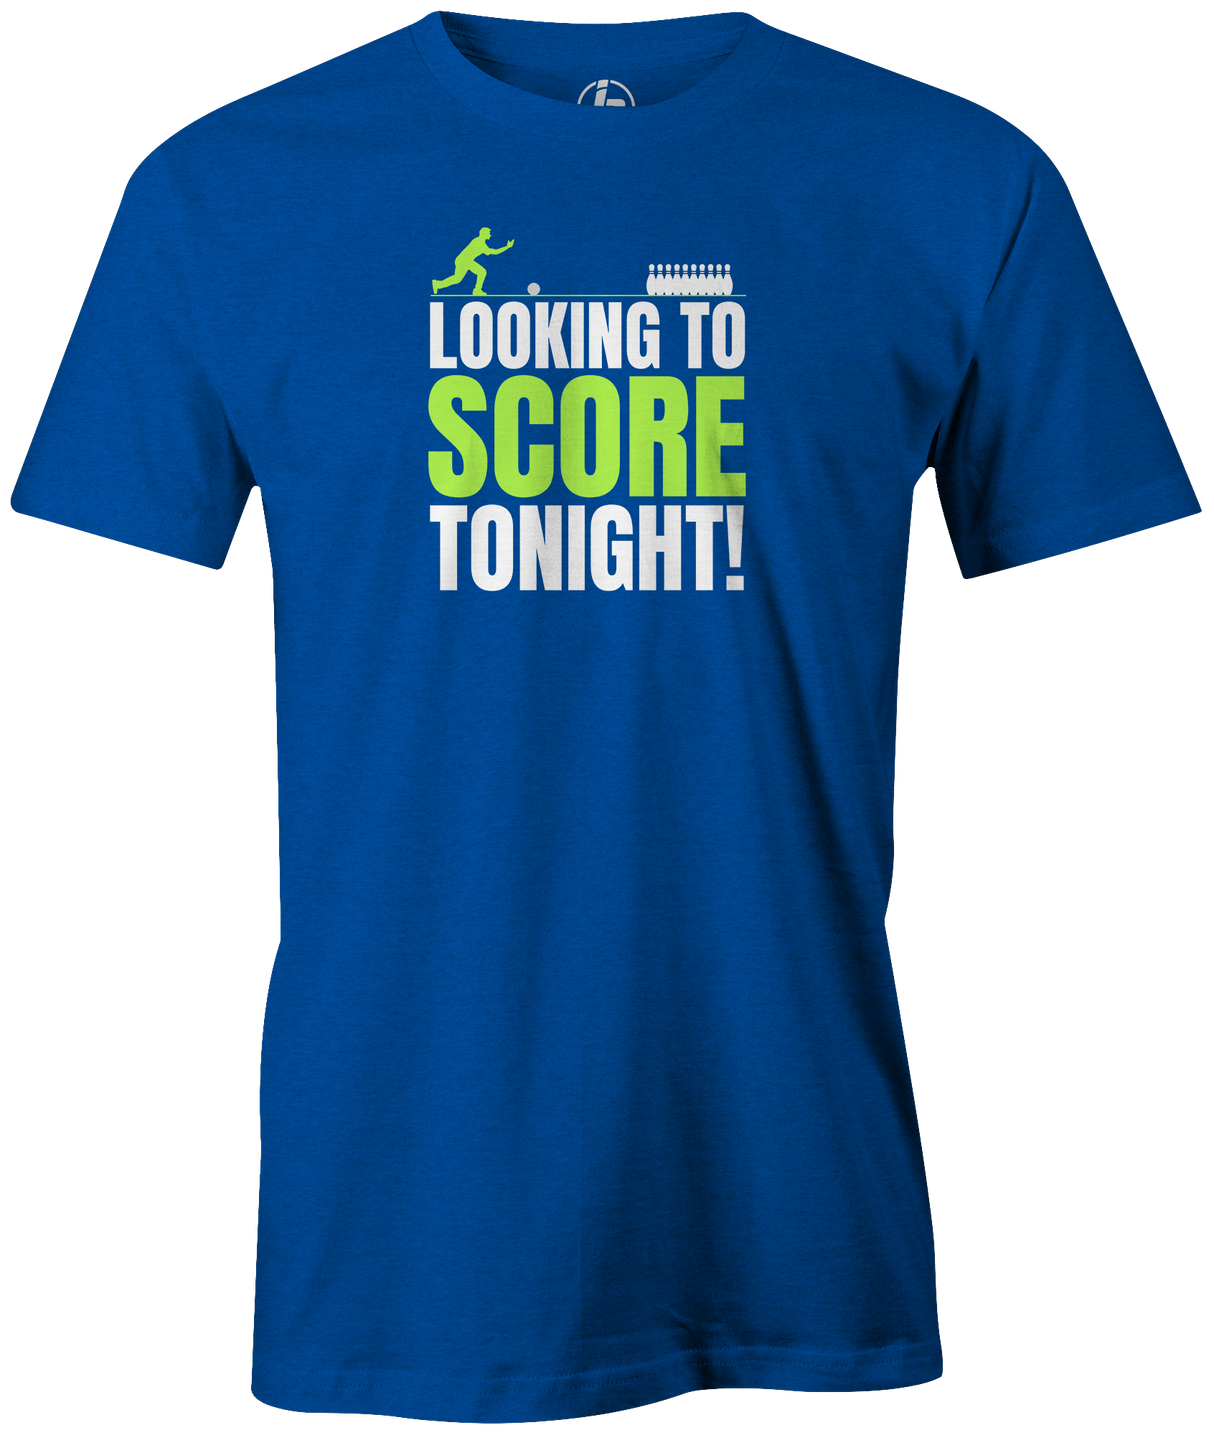 Looking to score tonight? Head to the lanes in this HOT Tee! A perfect shirt for a bowling date night with your girlfriend or boyfriend. Have fun with this funny bowling tshirt design. Night out with friends bowling. Crazy bowl. bowlingshirt.